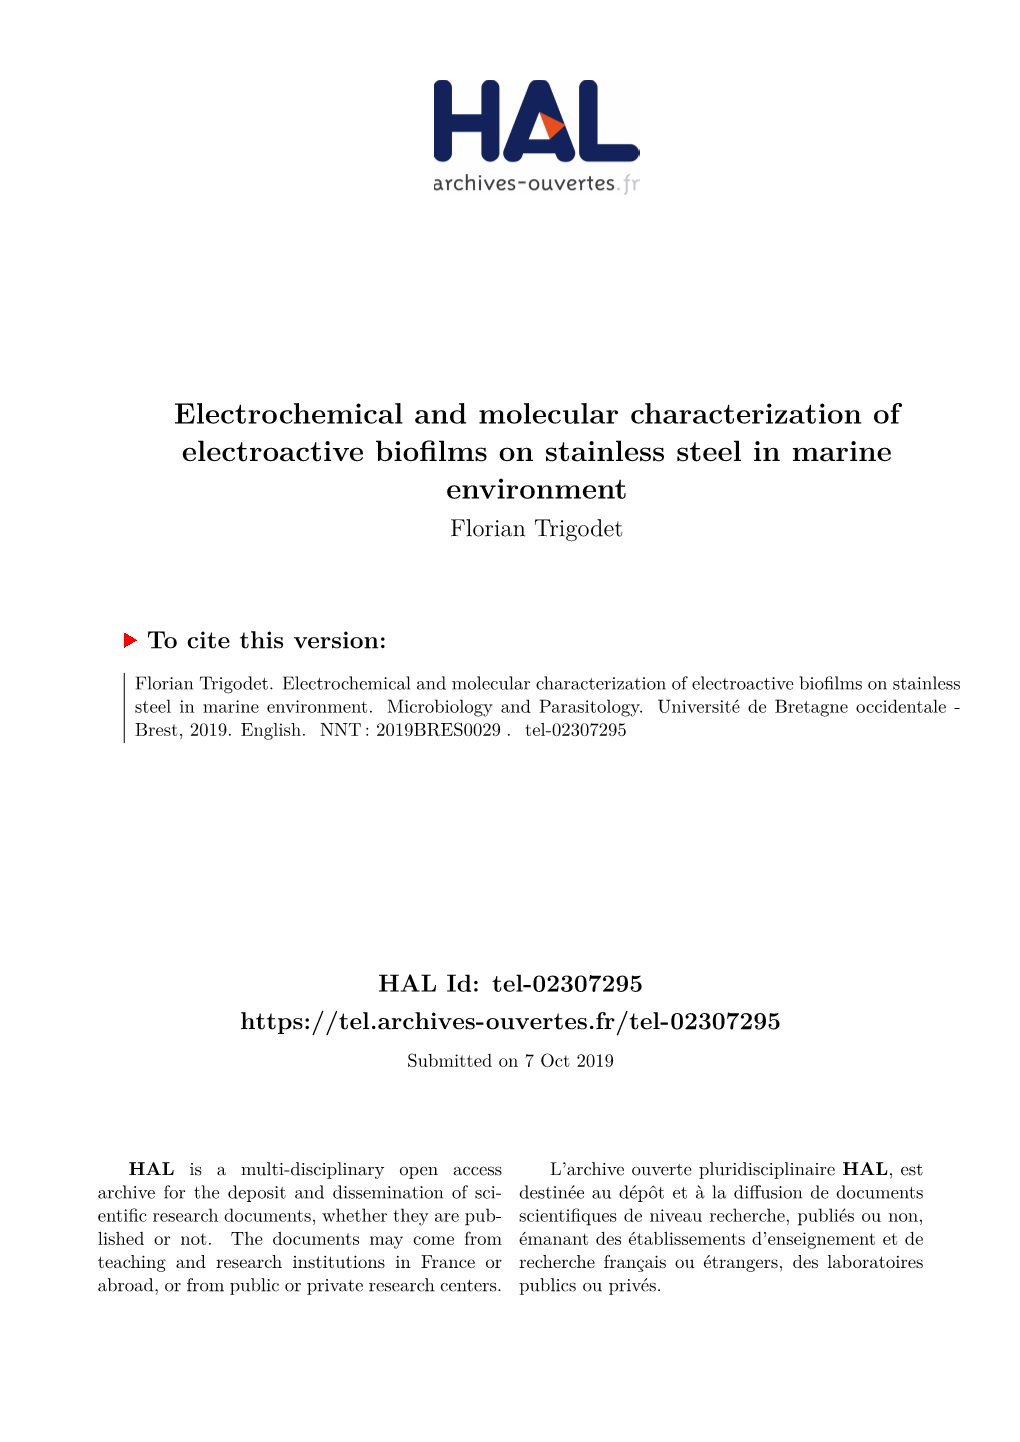 Electrochemical and Molecular Characterization of Electroactive Biofilms on Stainless Steel in Marine Environment Florian Trigodet